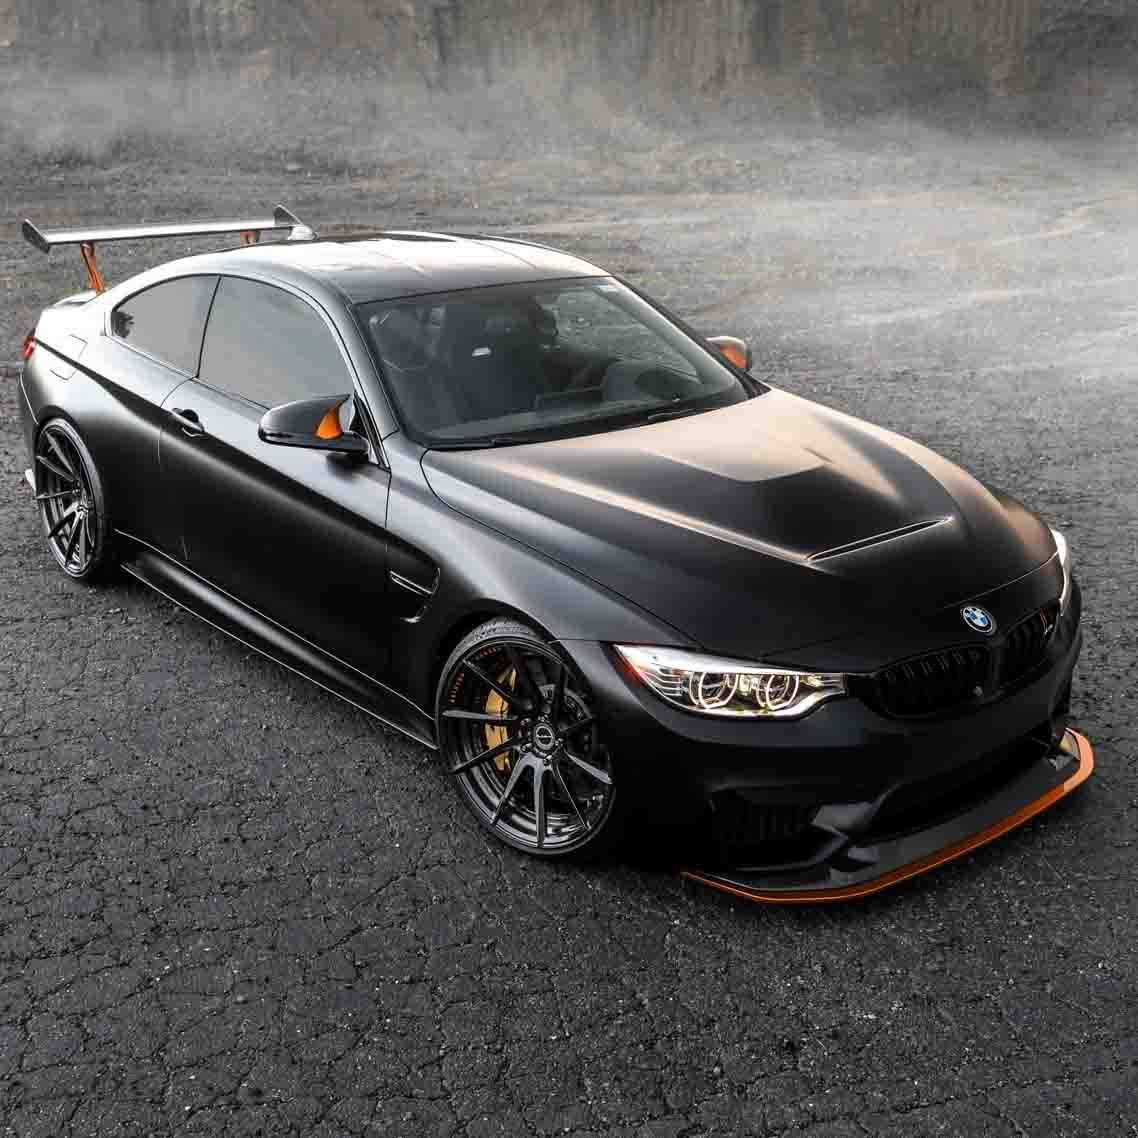 images-products-1-2829-232975117-matte-black-bmw-m4-gts-brixton-forged-r10d-duo-series-wheels-smoke-black-9.jpg